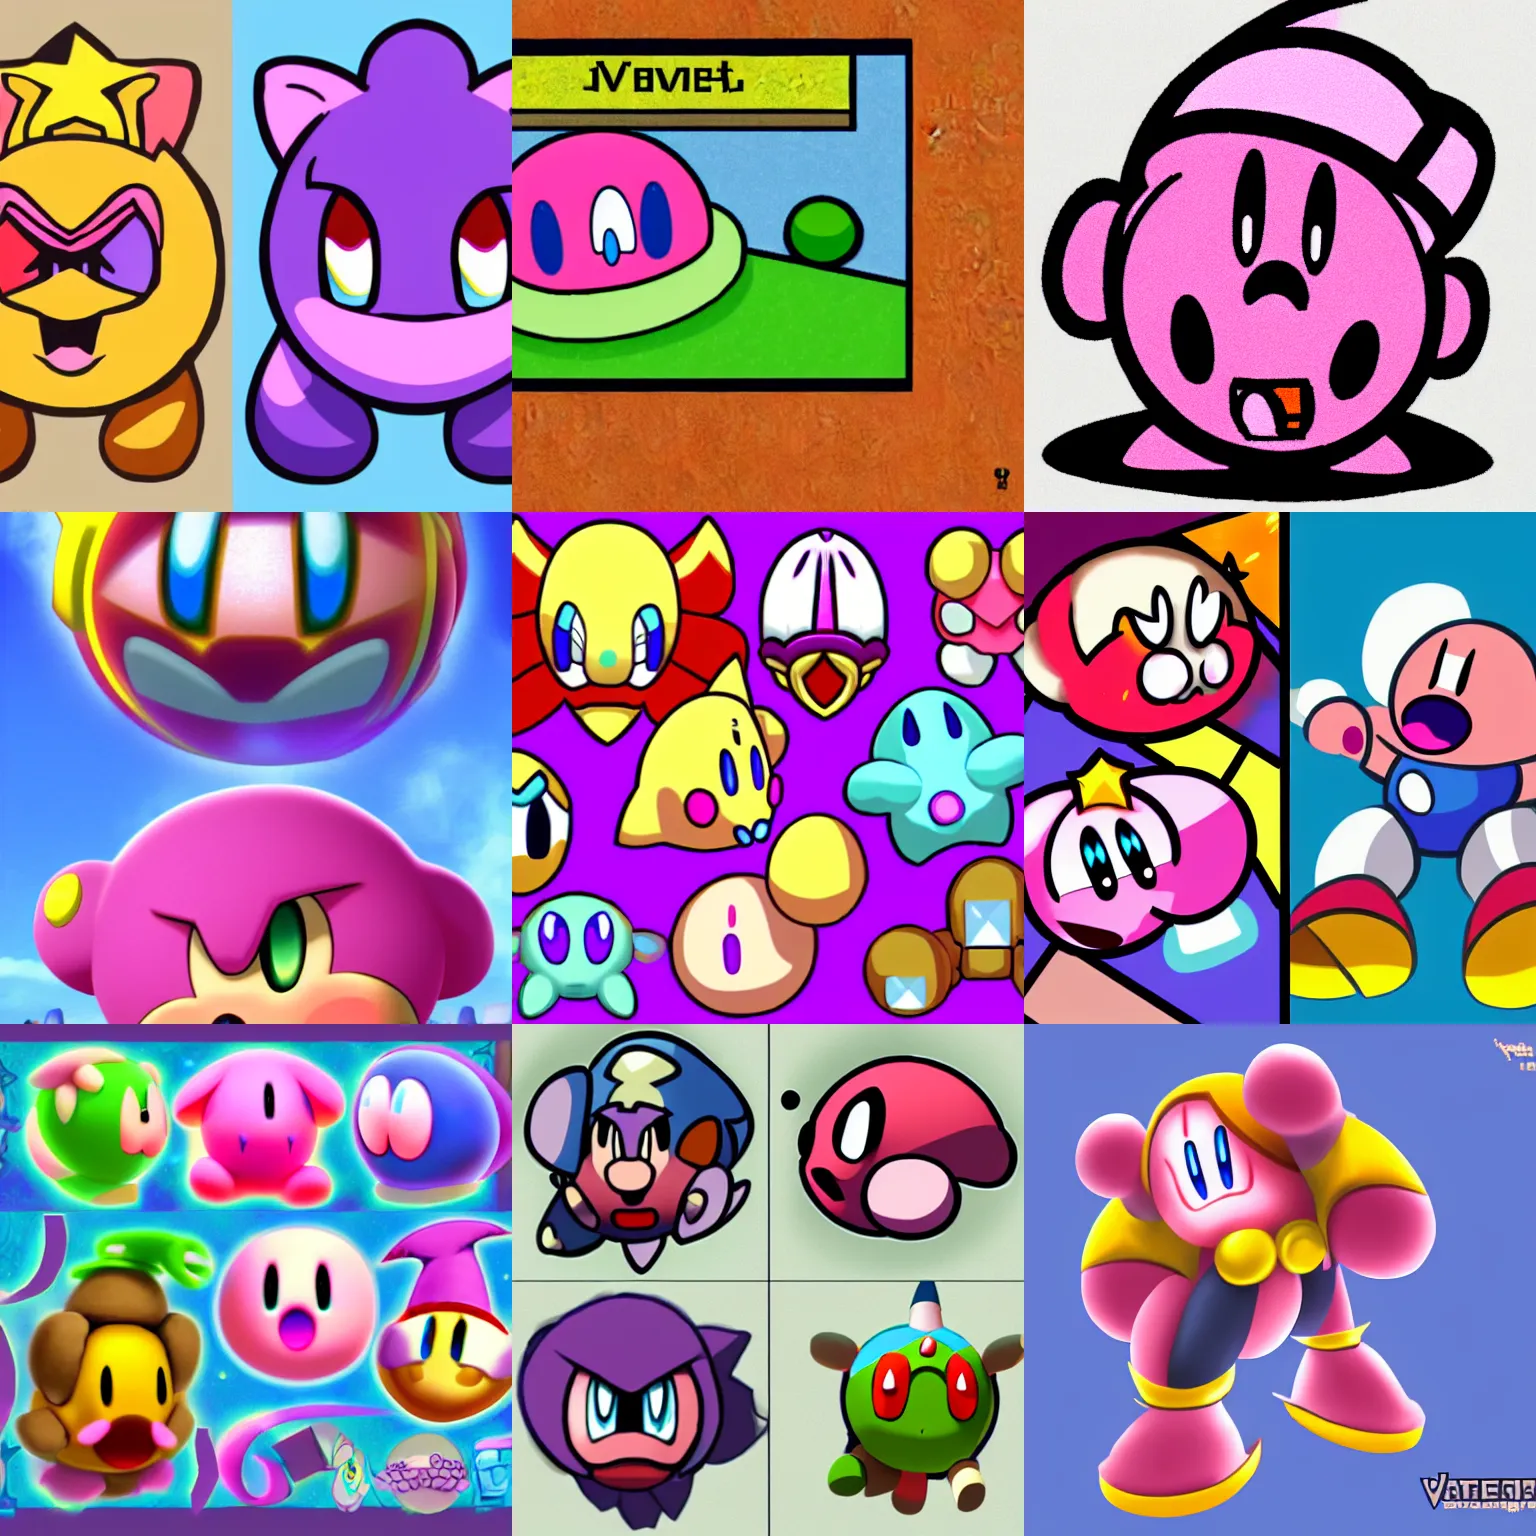 Prompt: videogame character like kirby, videogame art